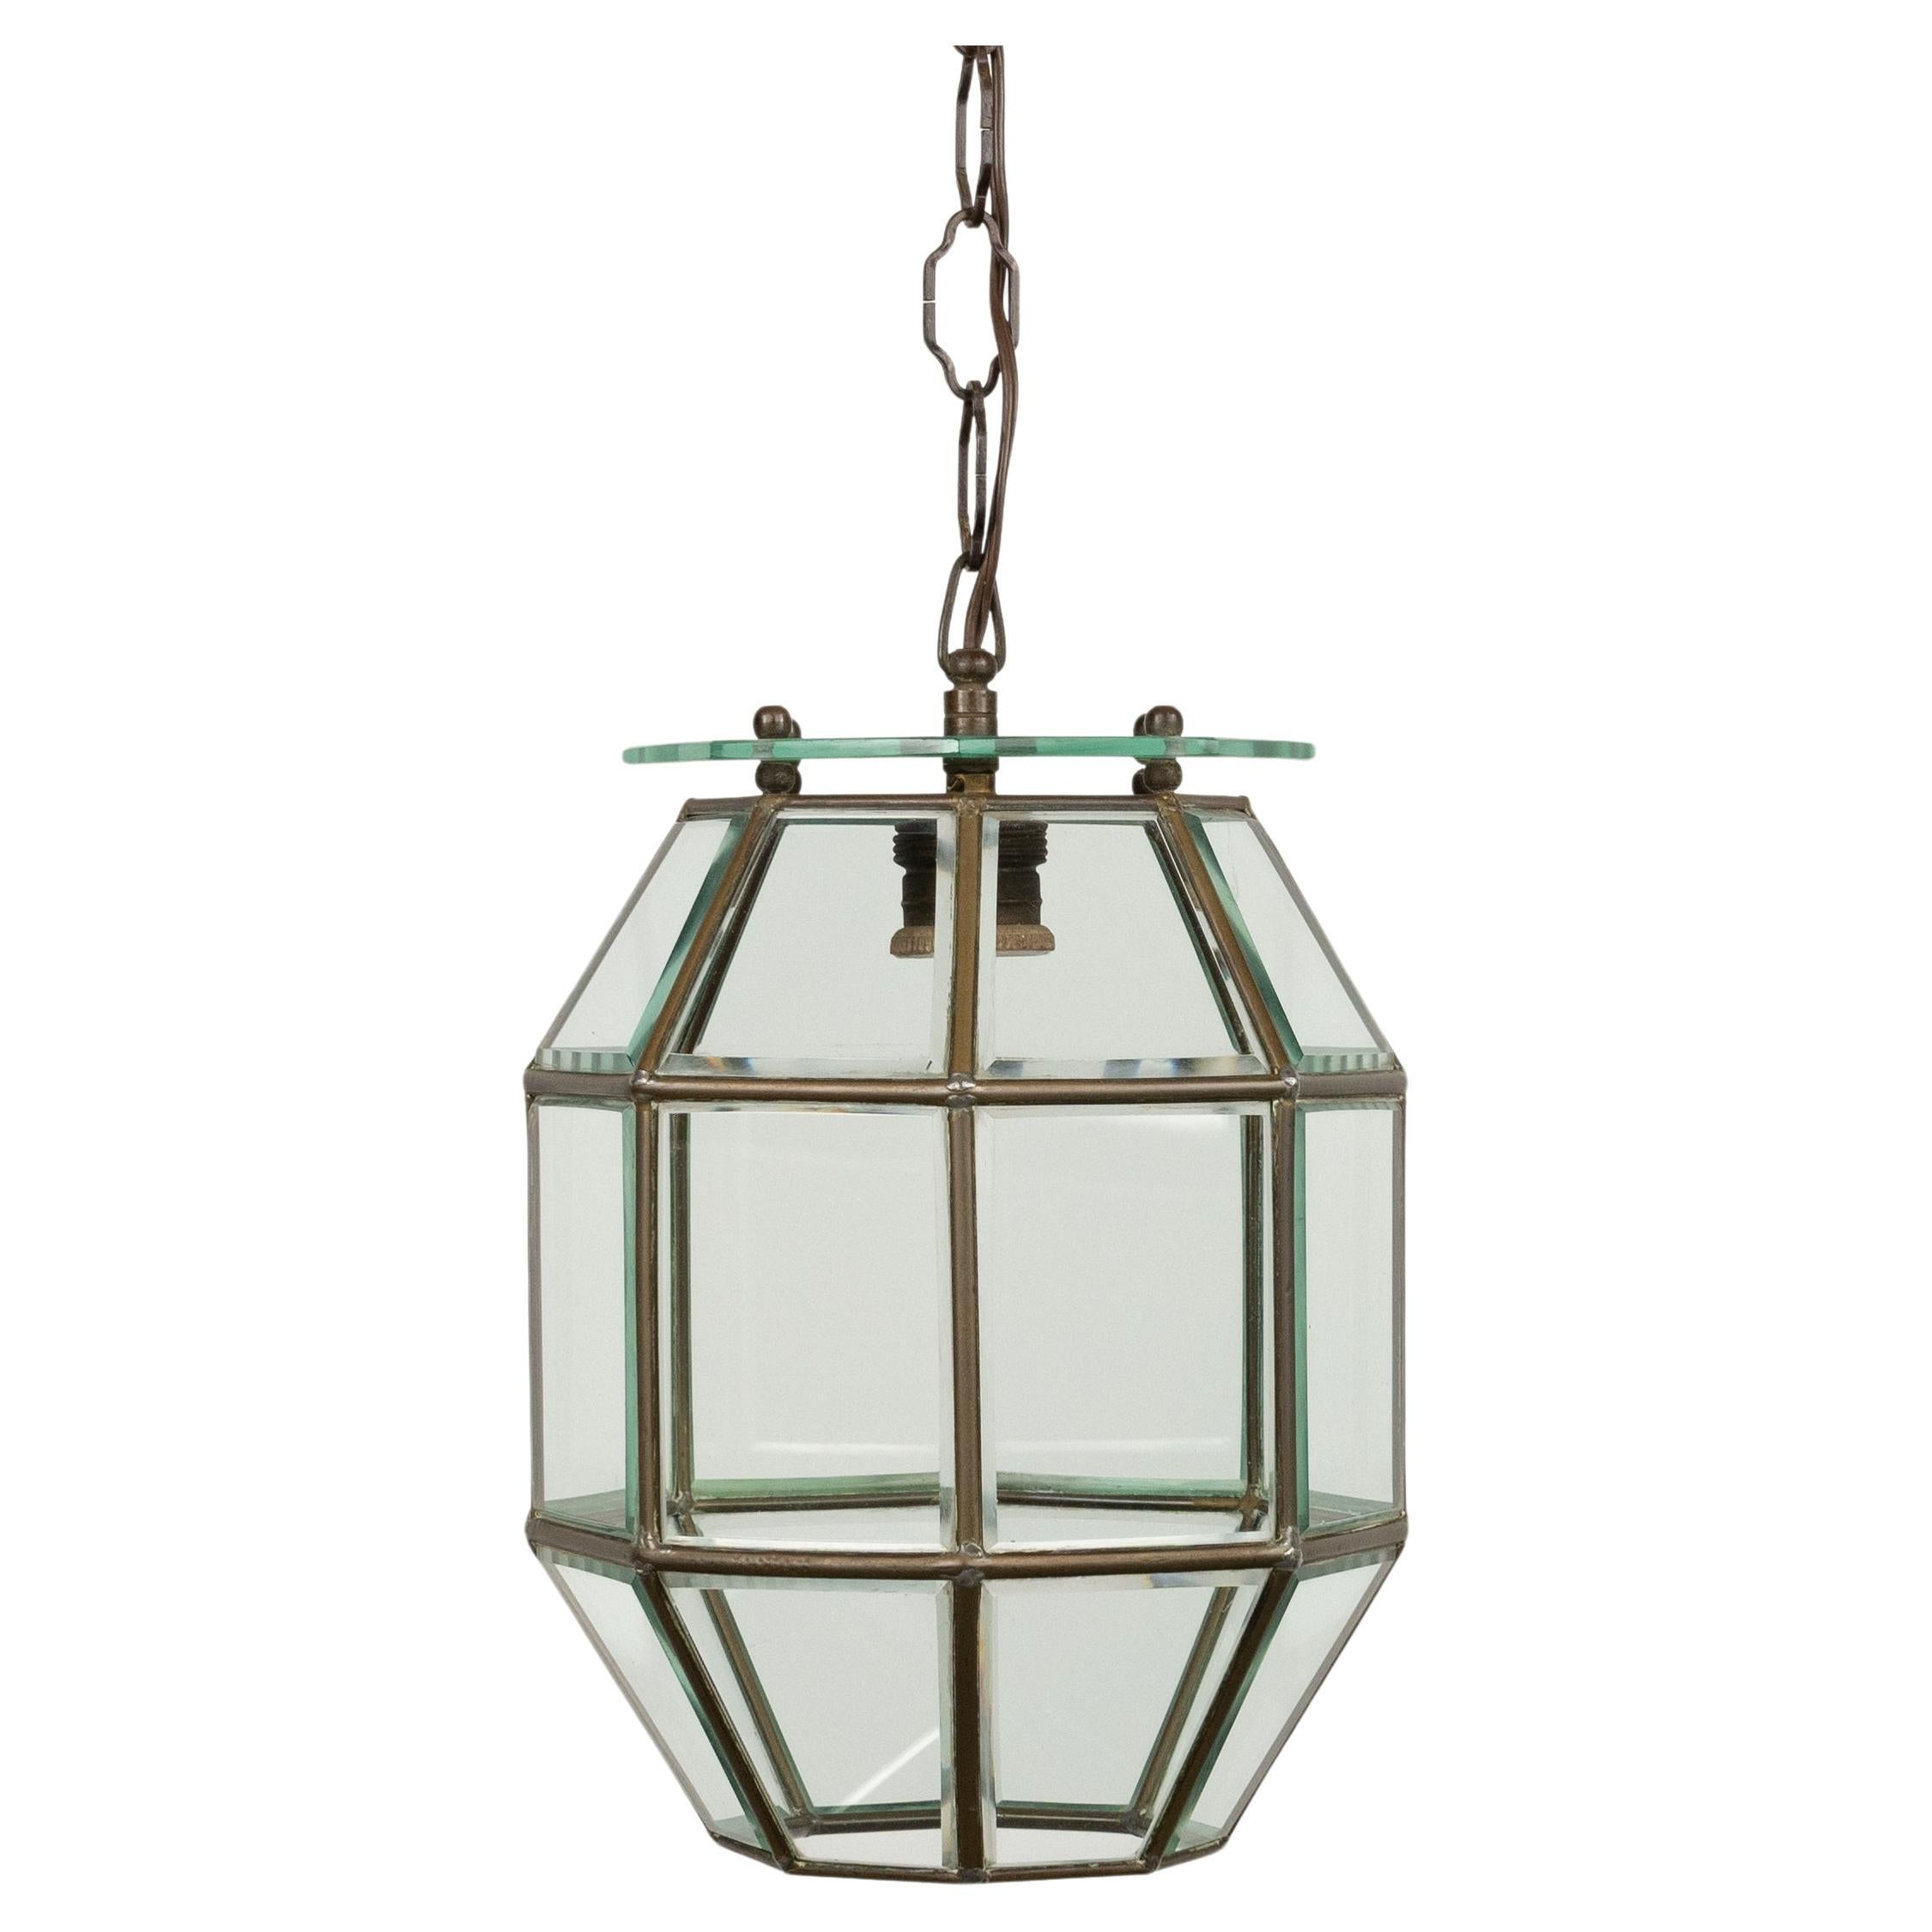 Italian Chandelier Lantern in Brass and Beveled Glass Adolf Loos Style, Italy 1950s For Sale